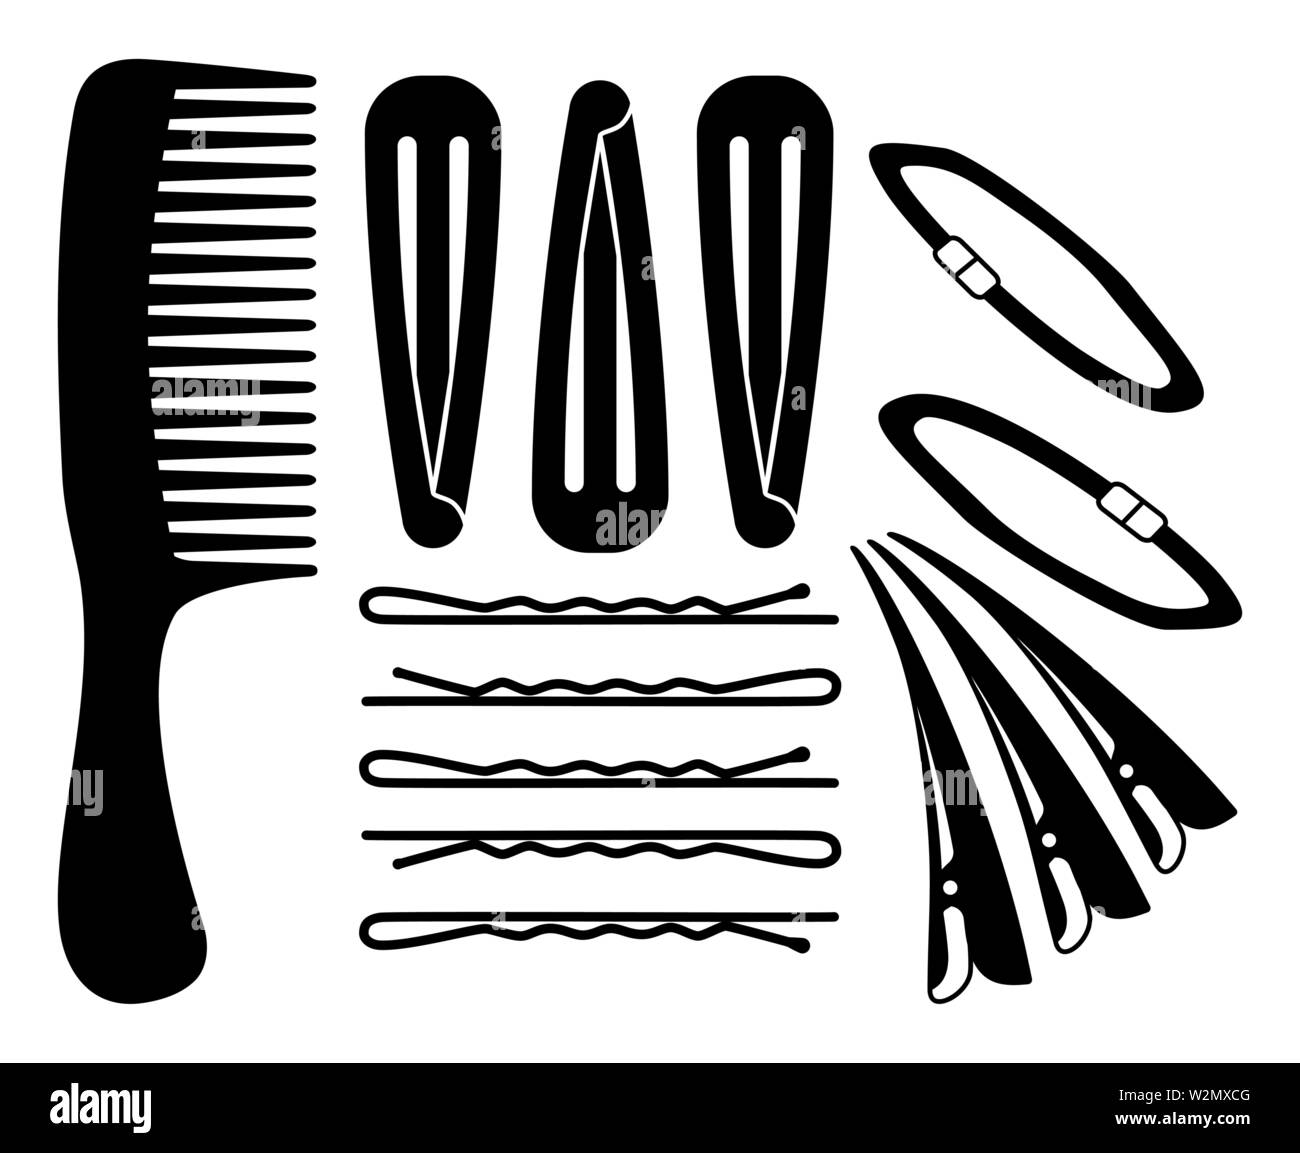 Black and white hair styling silhouette set Stock Vector